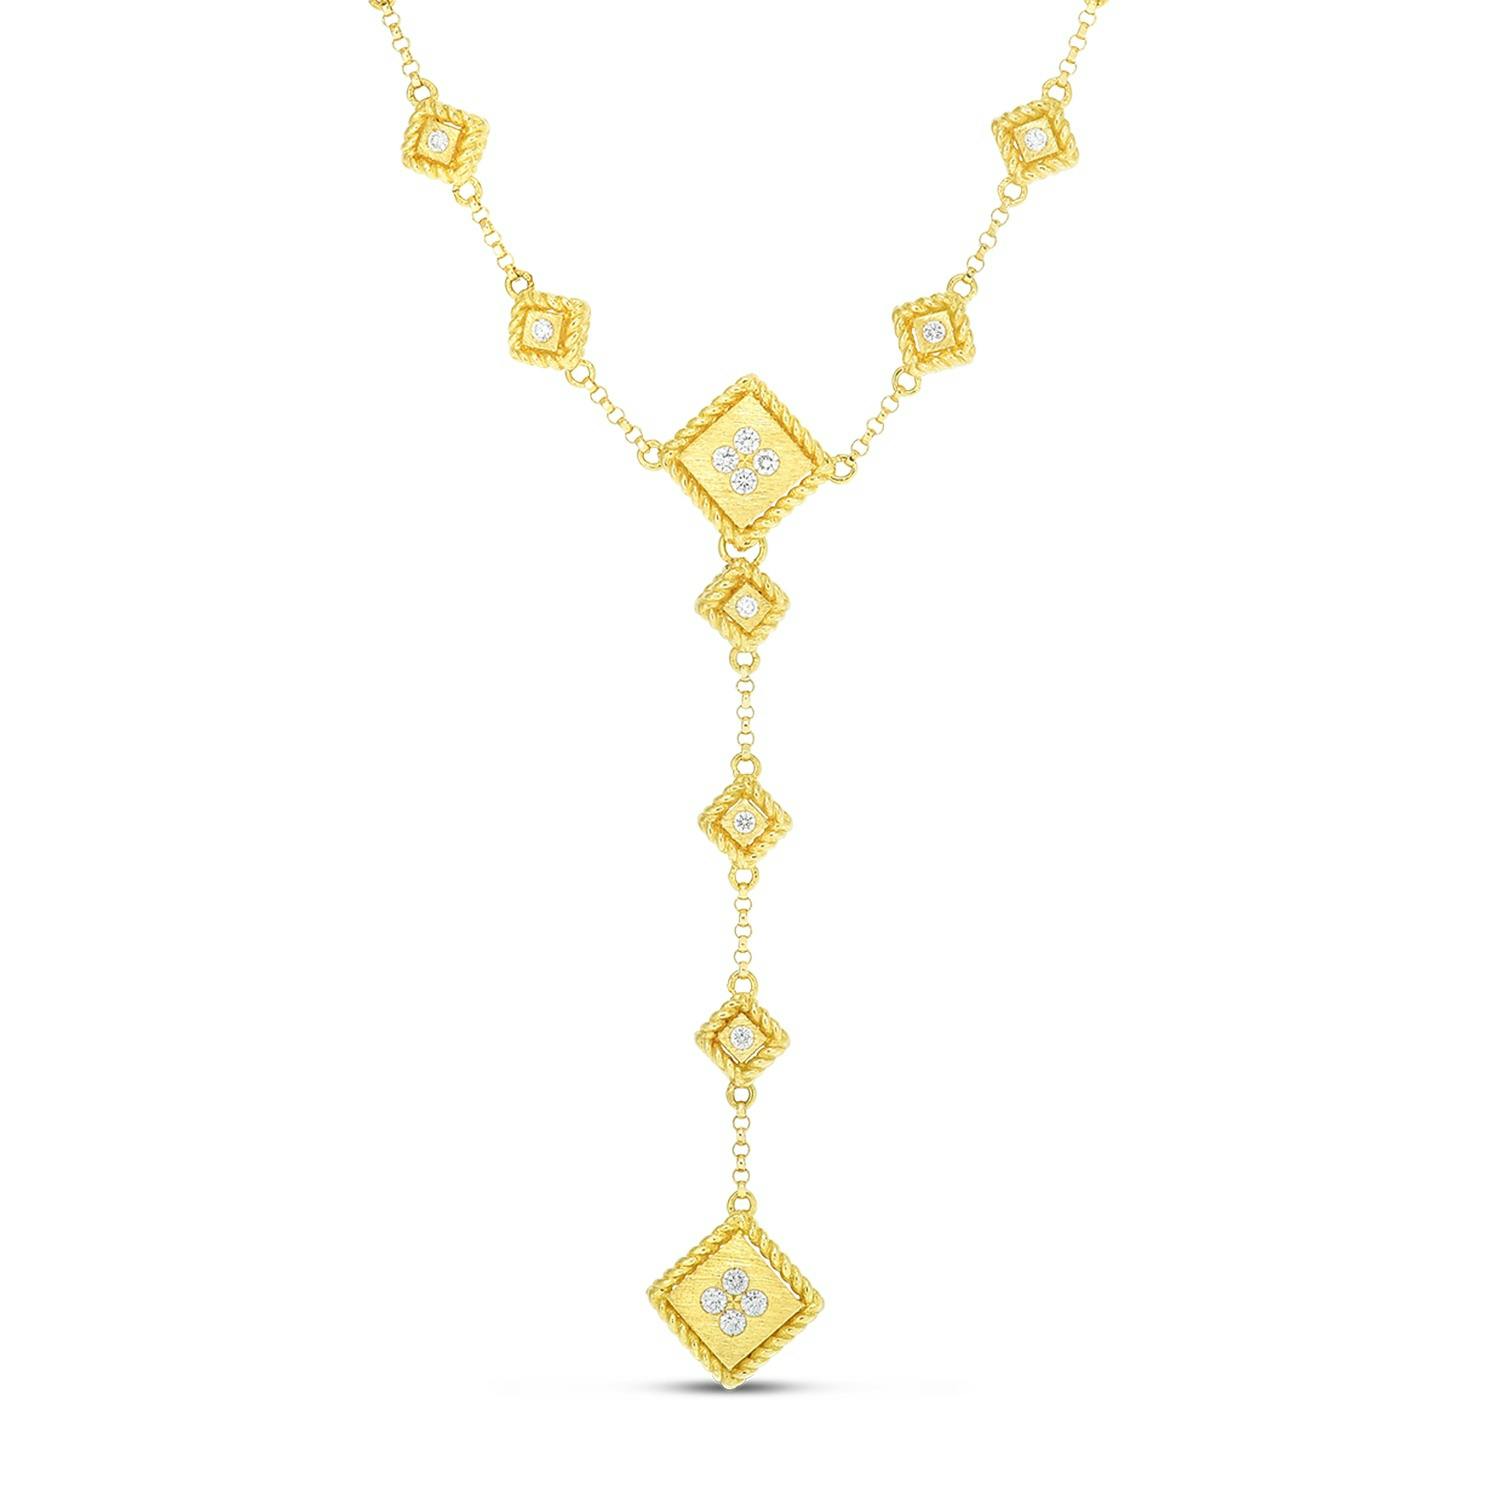 Roberto Coin 18k Yellow Gold Palazzo Ducale Diamond Lariat Style Necklace